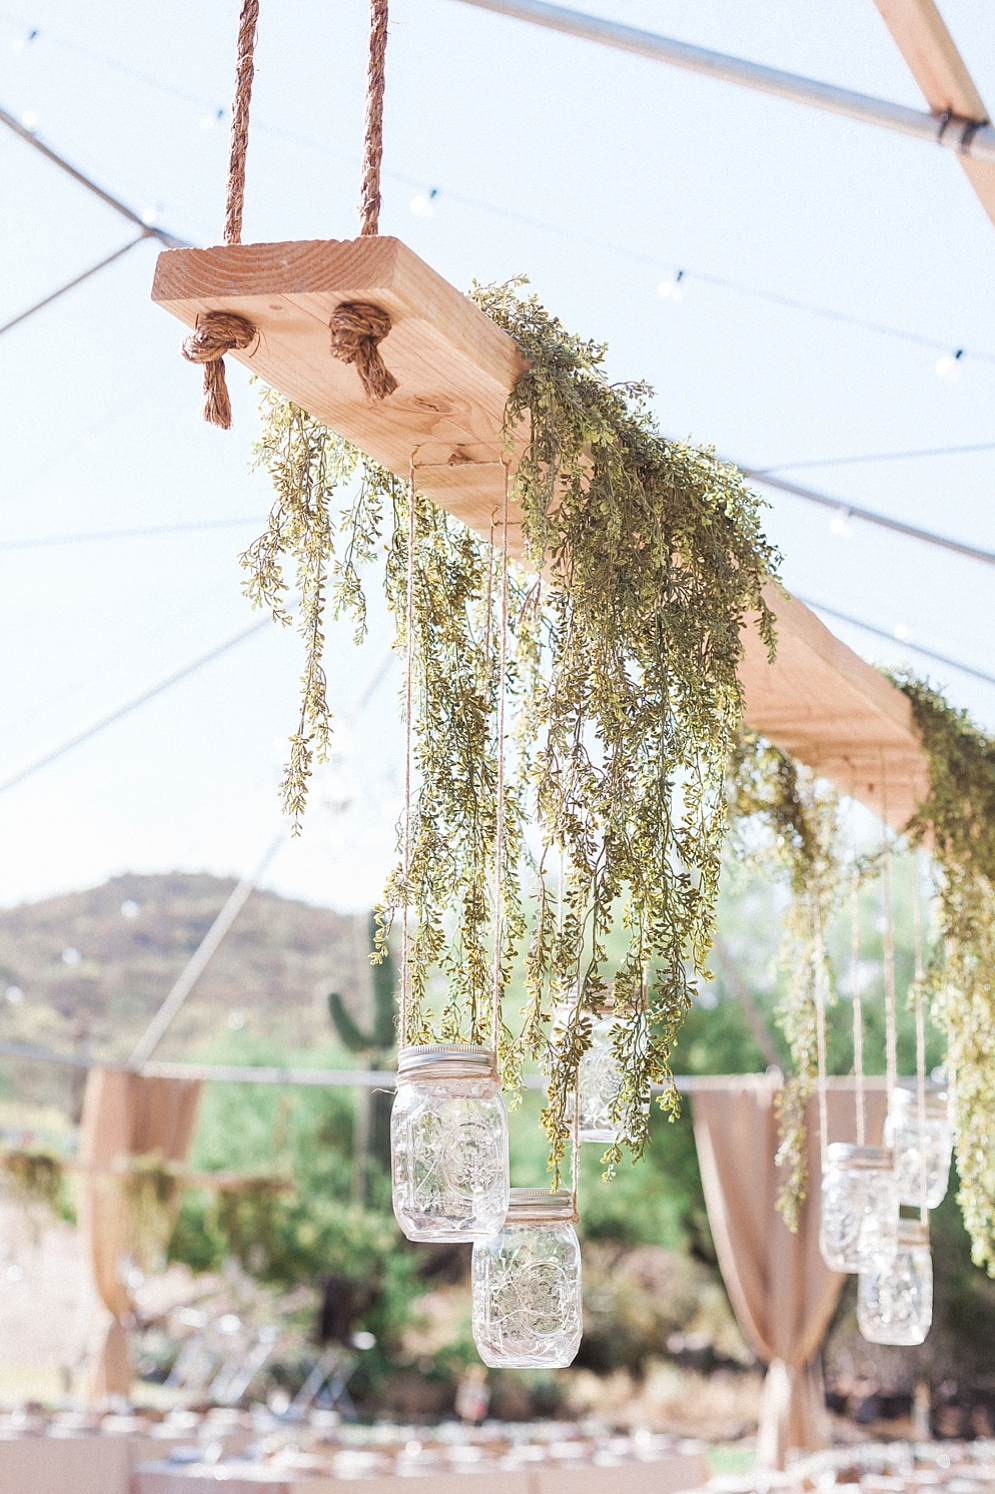 Wedding Wood Decorations to Incorporate | St. Louis Wedding Photographer | Saguaro Lake Guest Ranch Wedding | reception centerpieces with wood suspended